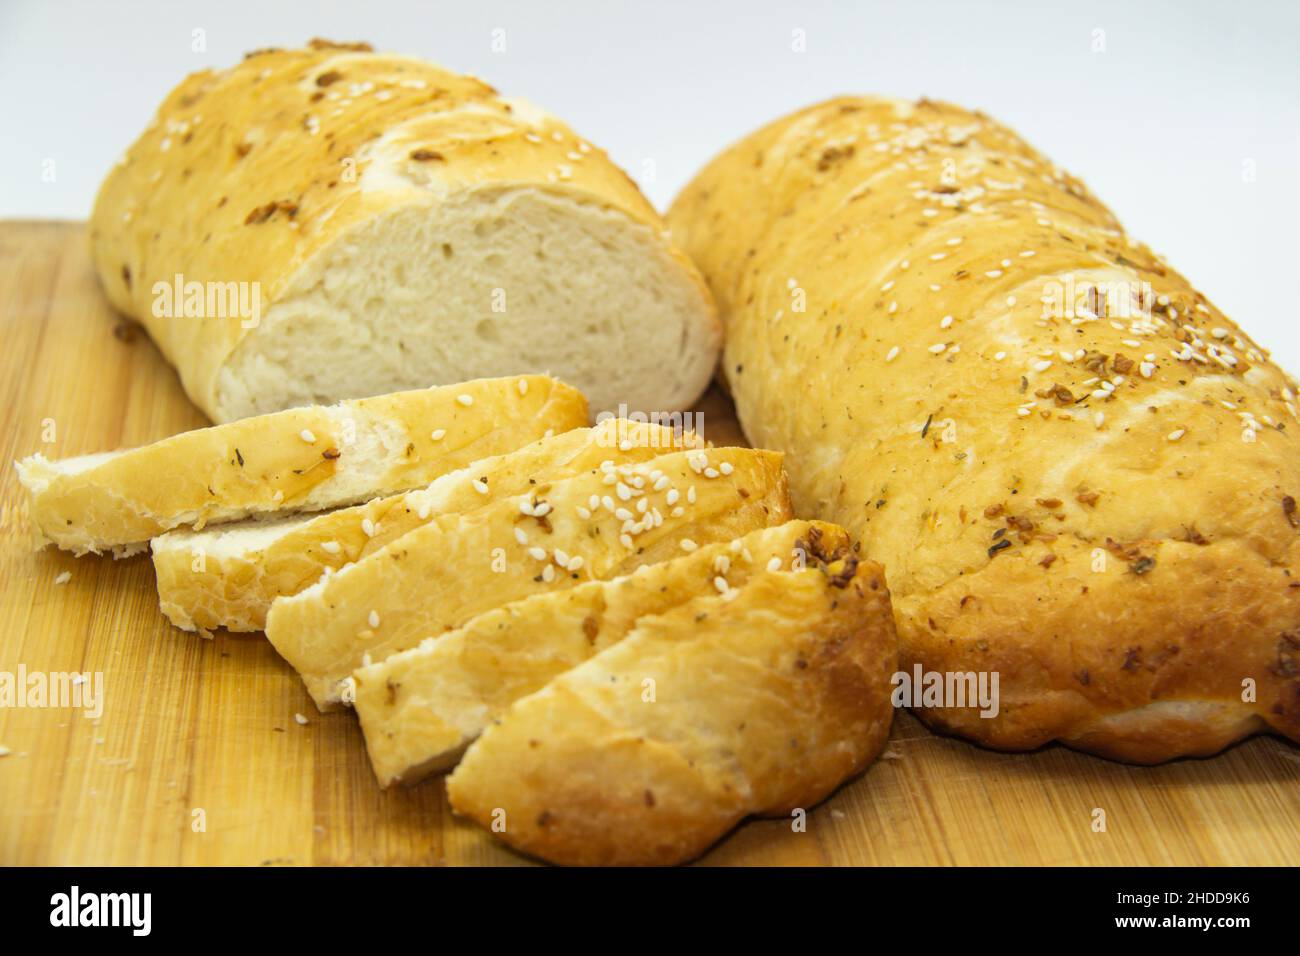 Wheat bread baked from flour at home. Sliced bread on wooden board  against background. Food with NO GMO. Homemade bread with spice on it. Stock Photo